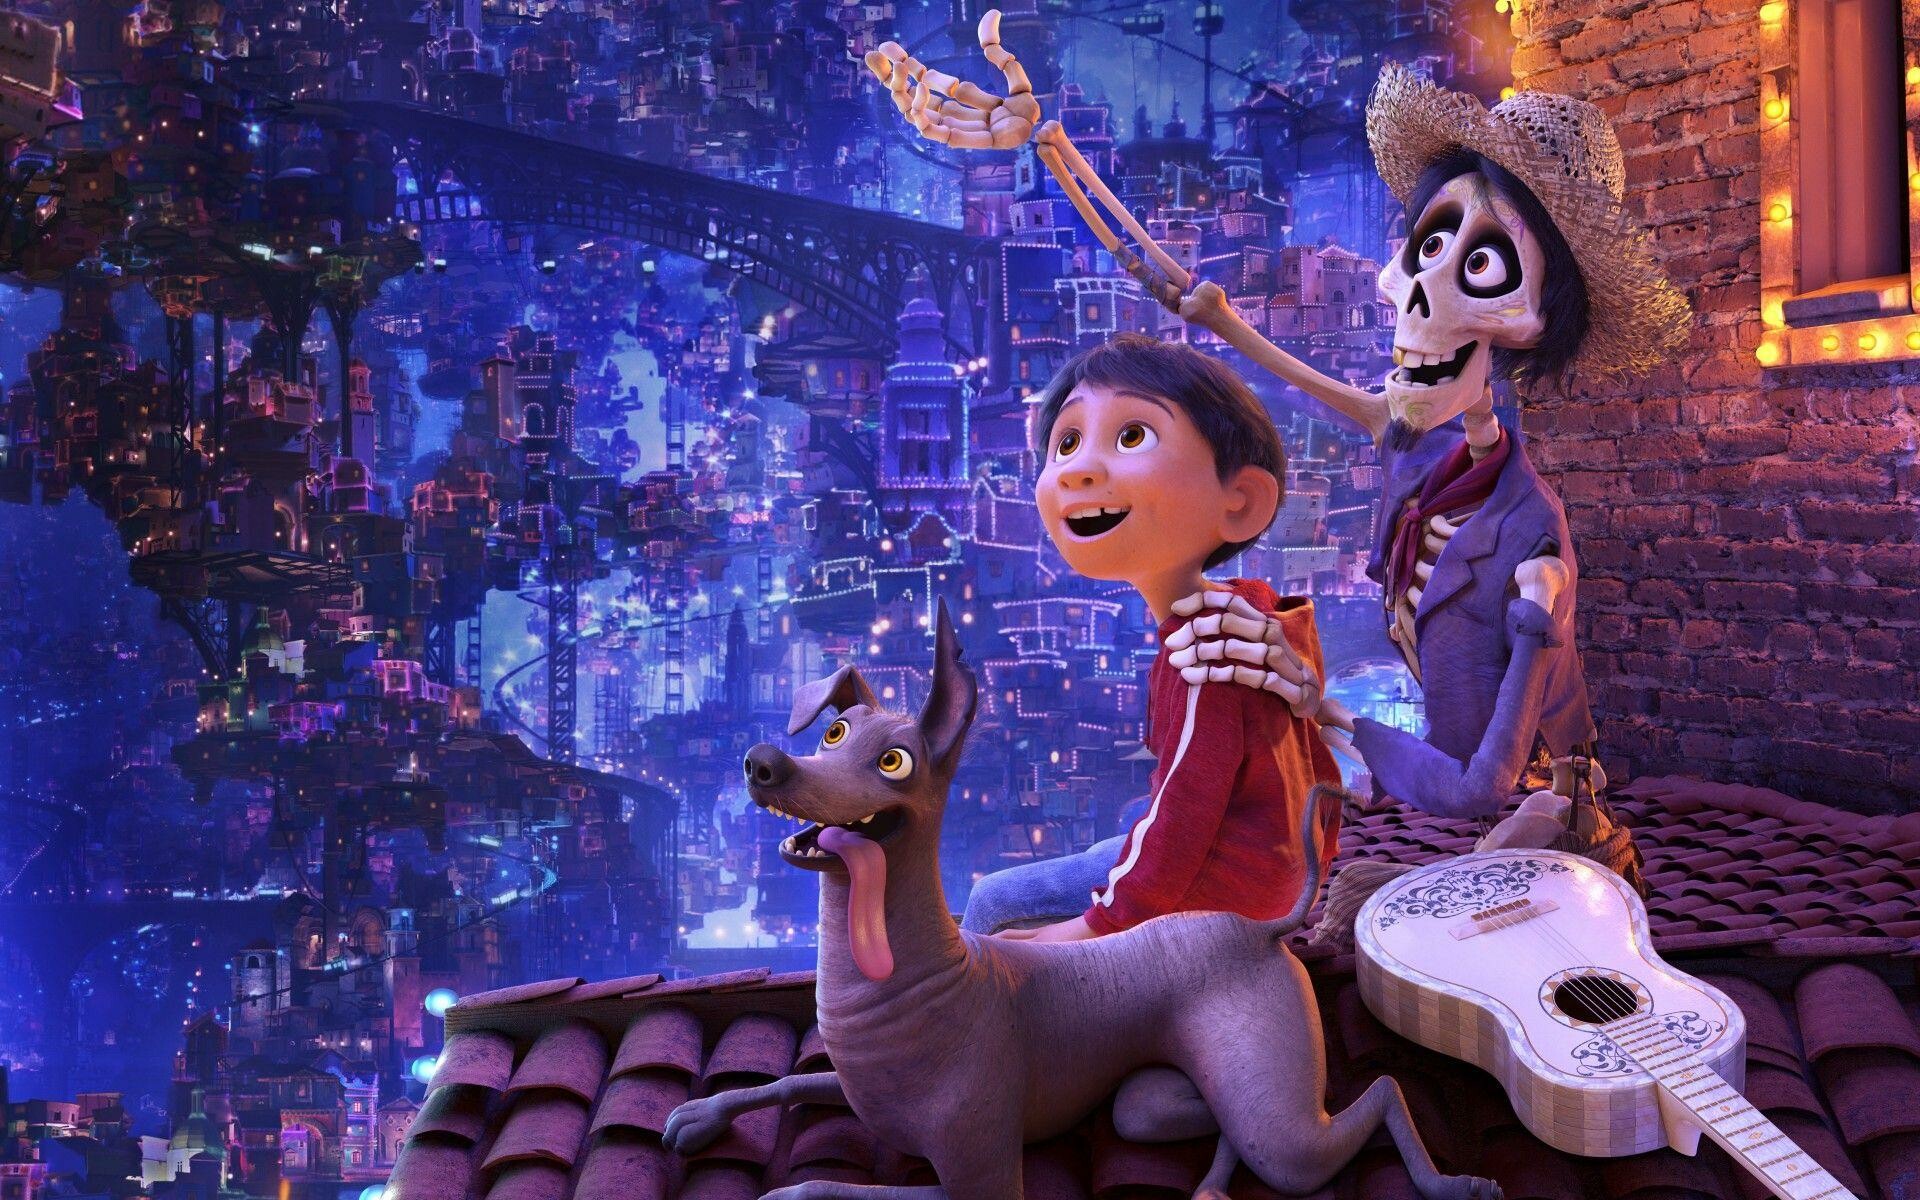 Coco (Cartoon): With his shoemaker kin banning him from becoming a musician due to ancestral indiscretions, young Miguel steals a sacred guitar from a crypt and enters the Land of the Dead to find his true legacy. 1920x1200 HD Wallpaper.